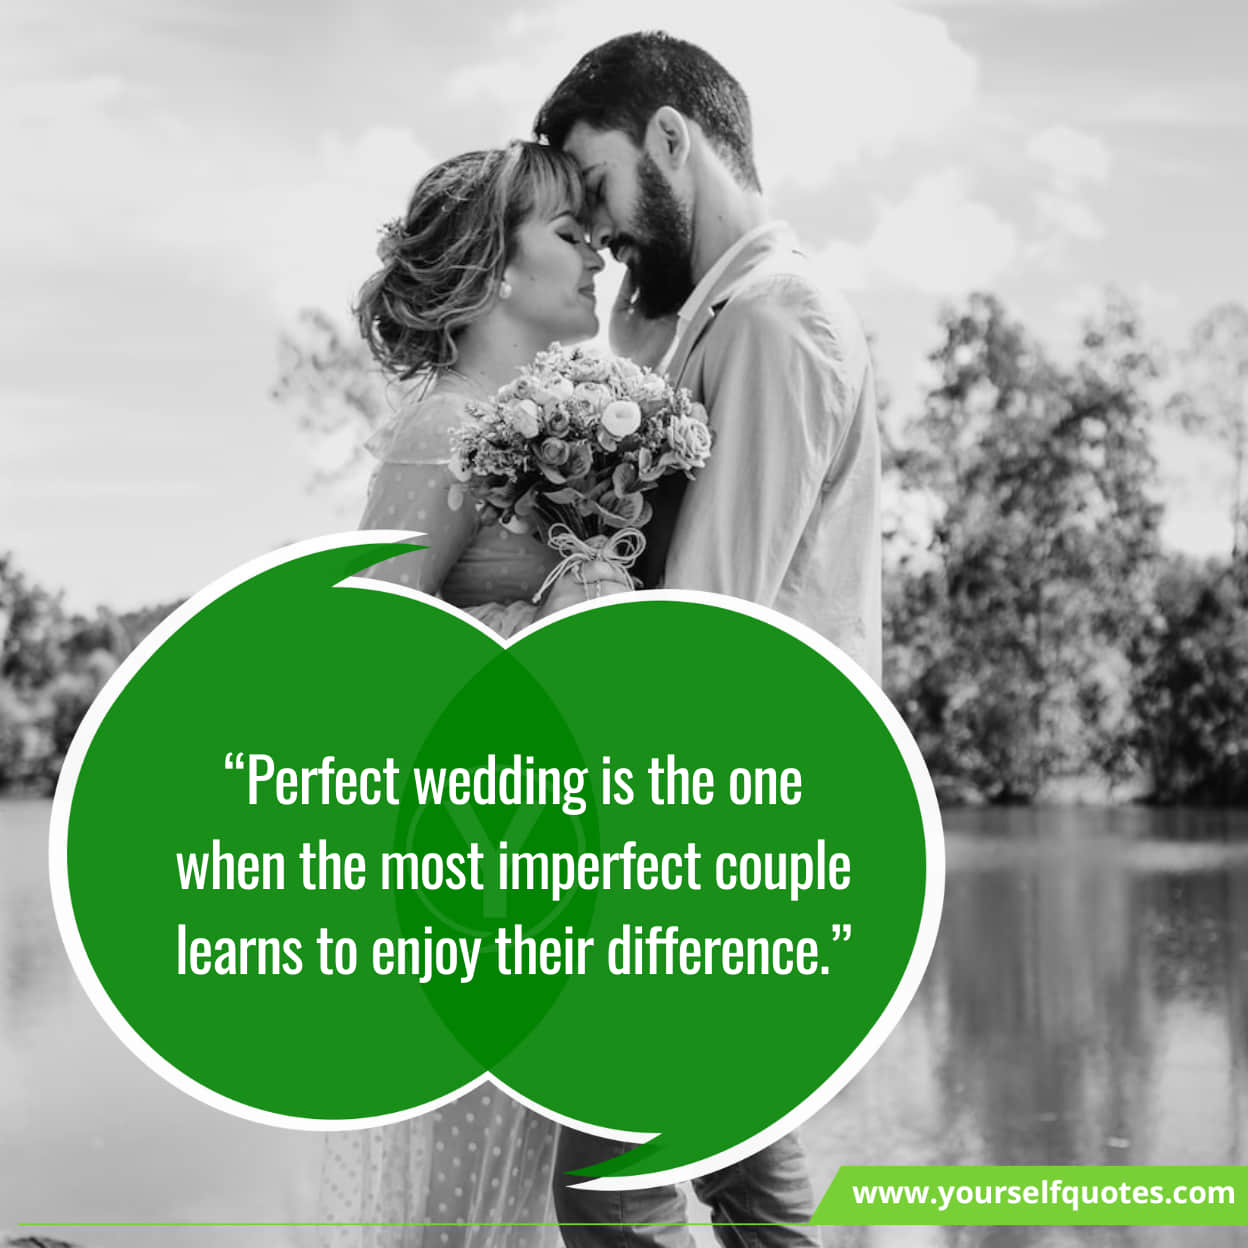 Unique Wedding Quotes for Bride and Groom